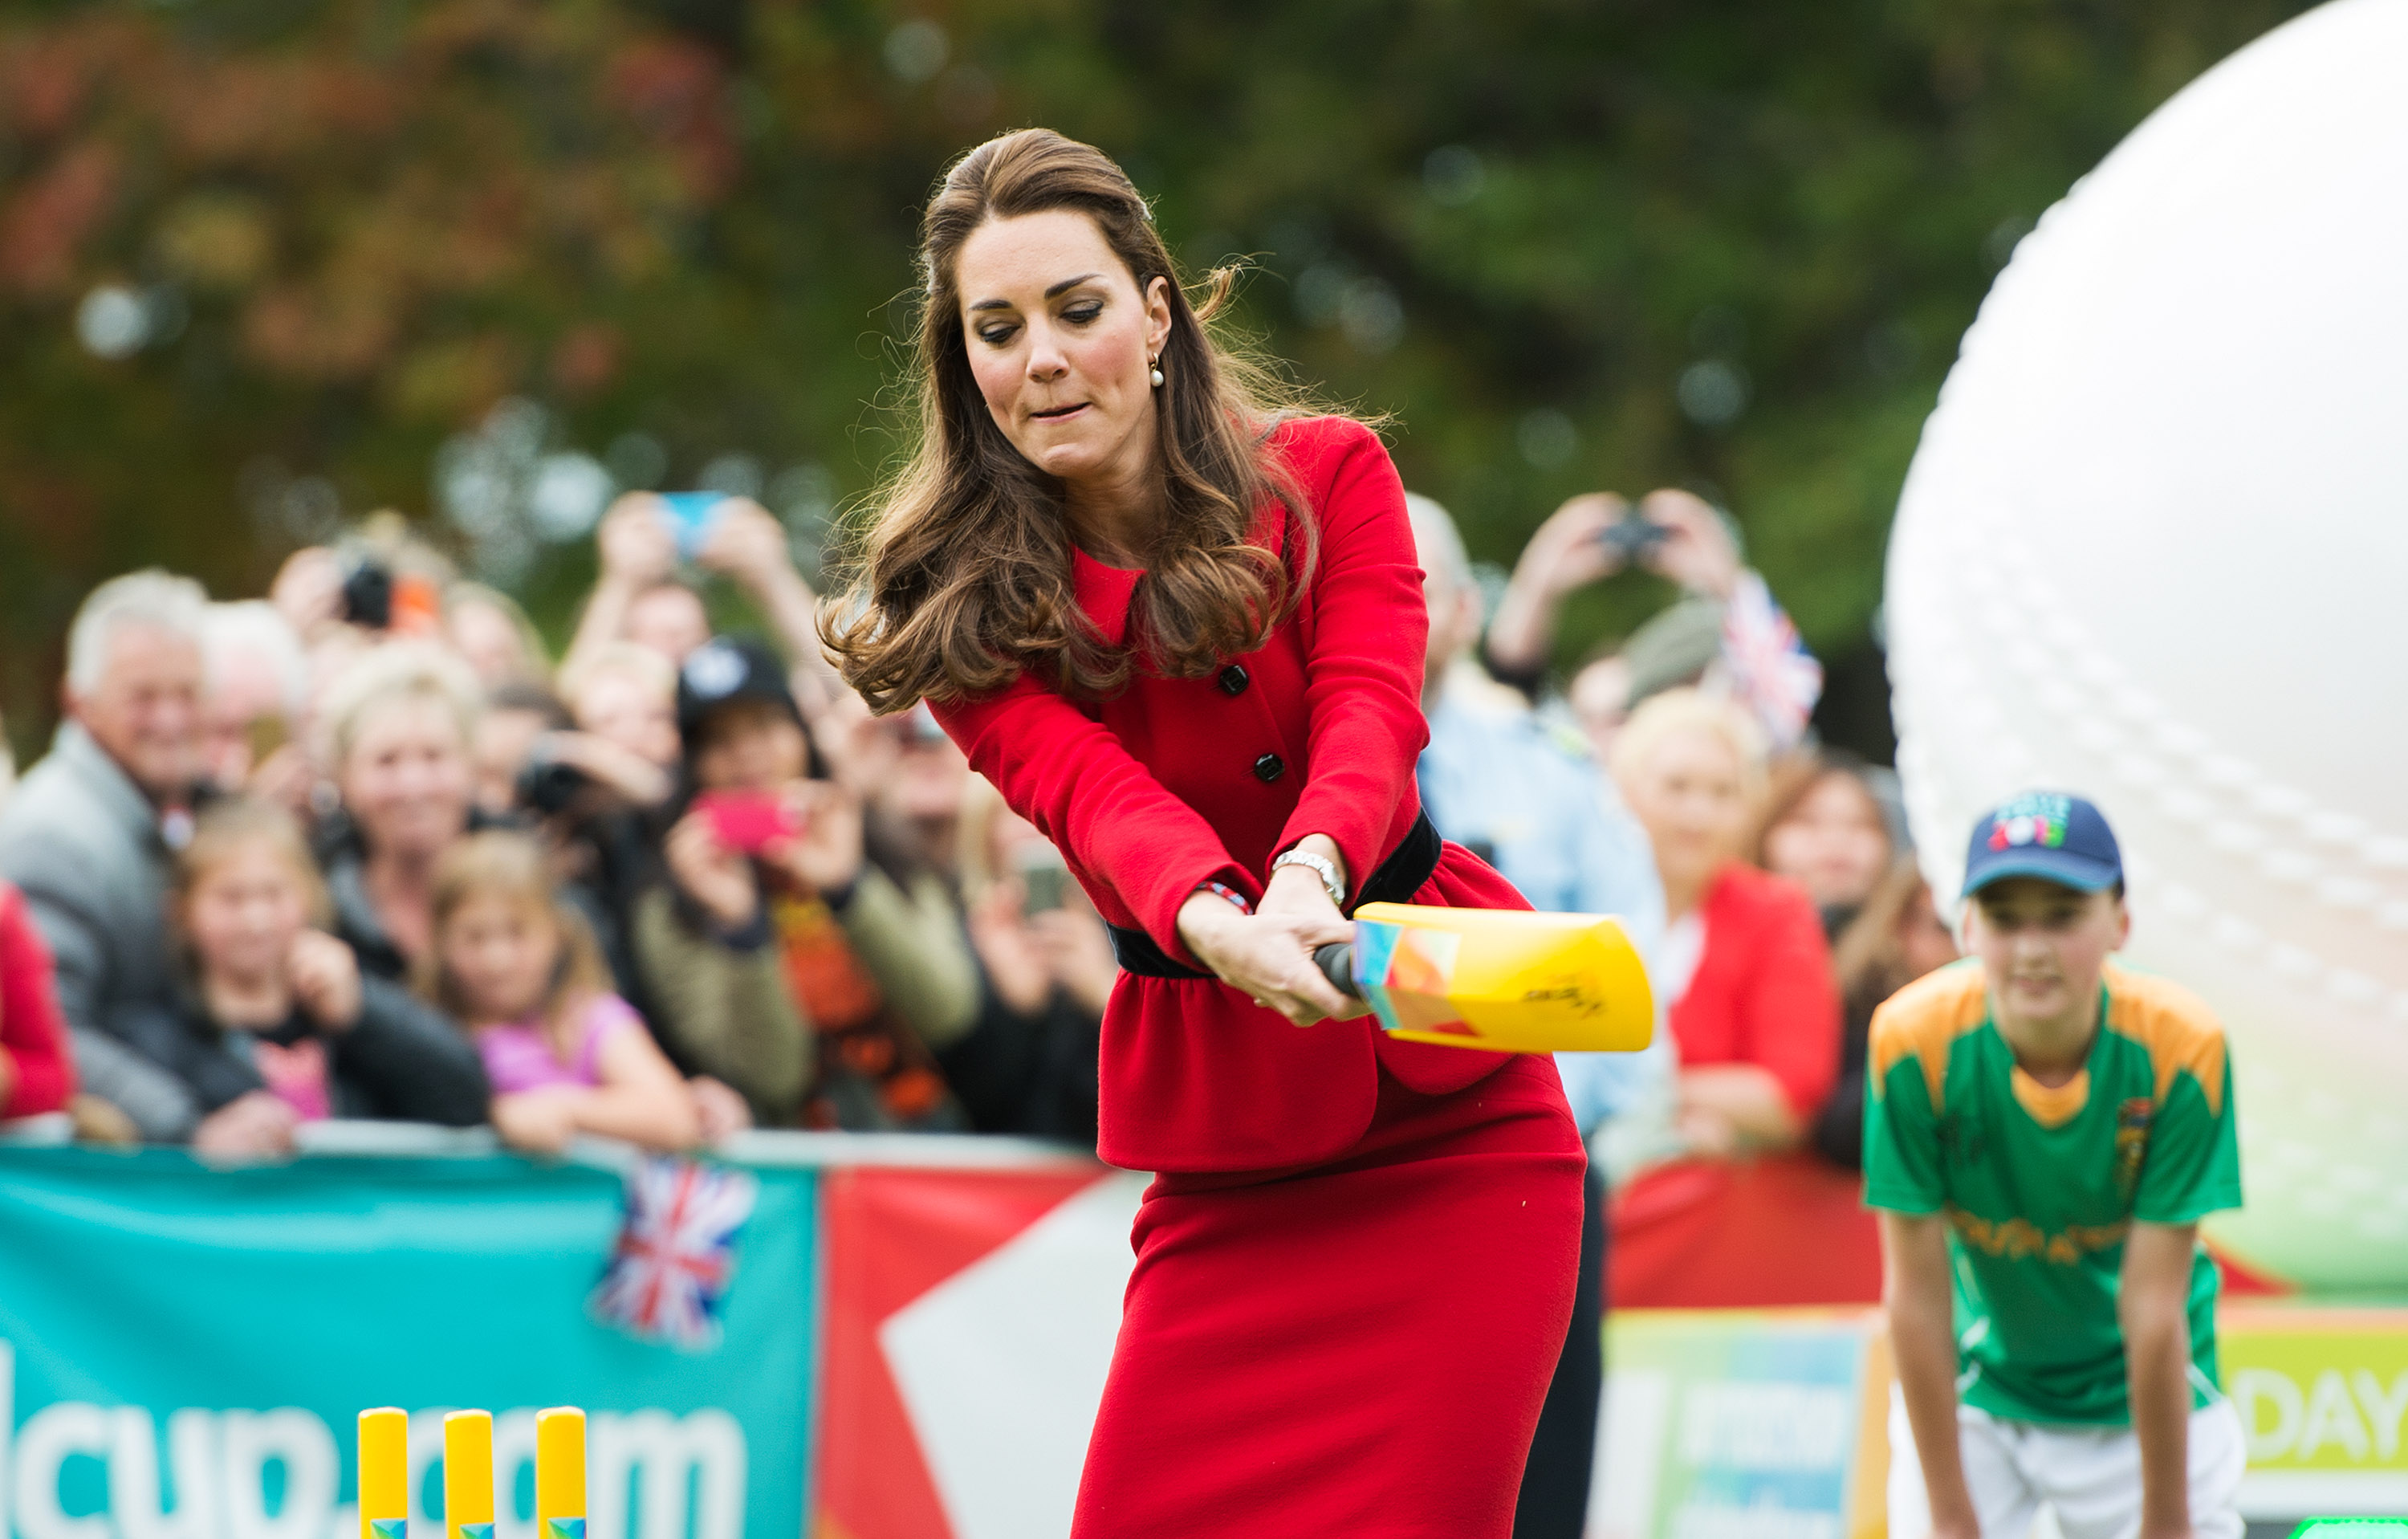 Catherine, Duchess of Cambridge bats during a game of cricket in Latimer Square on April 14, 2014 in Christchurch, New Zealand. (Samir Hussein—WireImage)